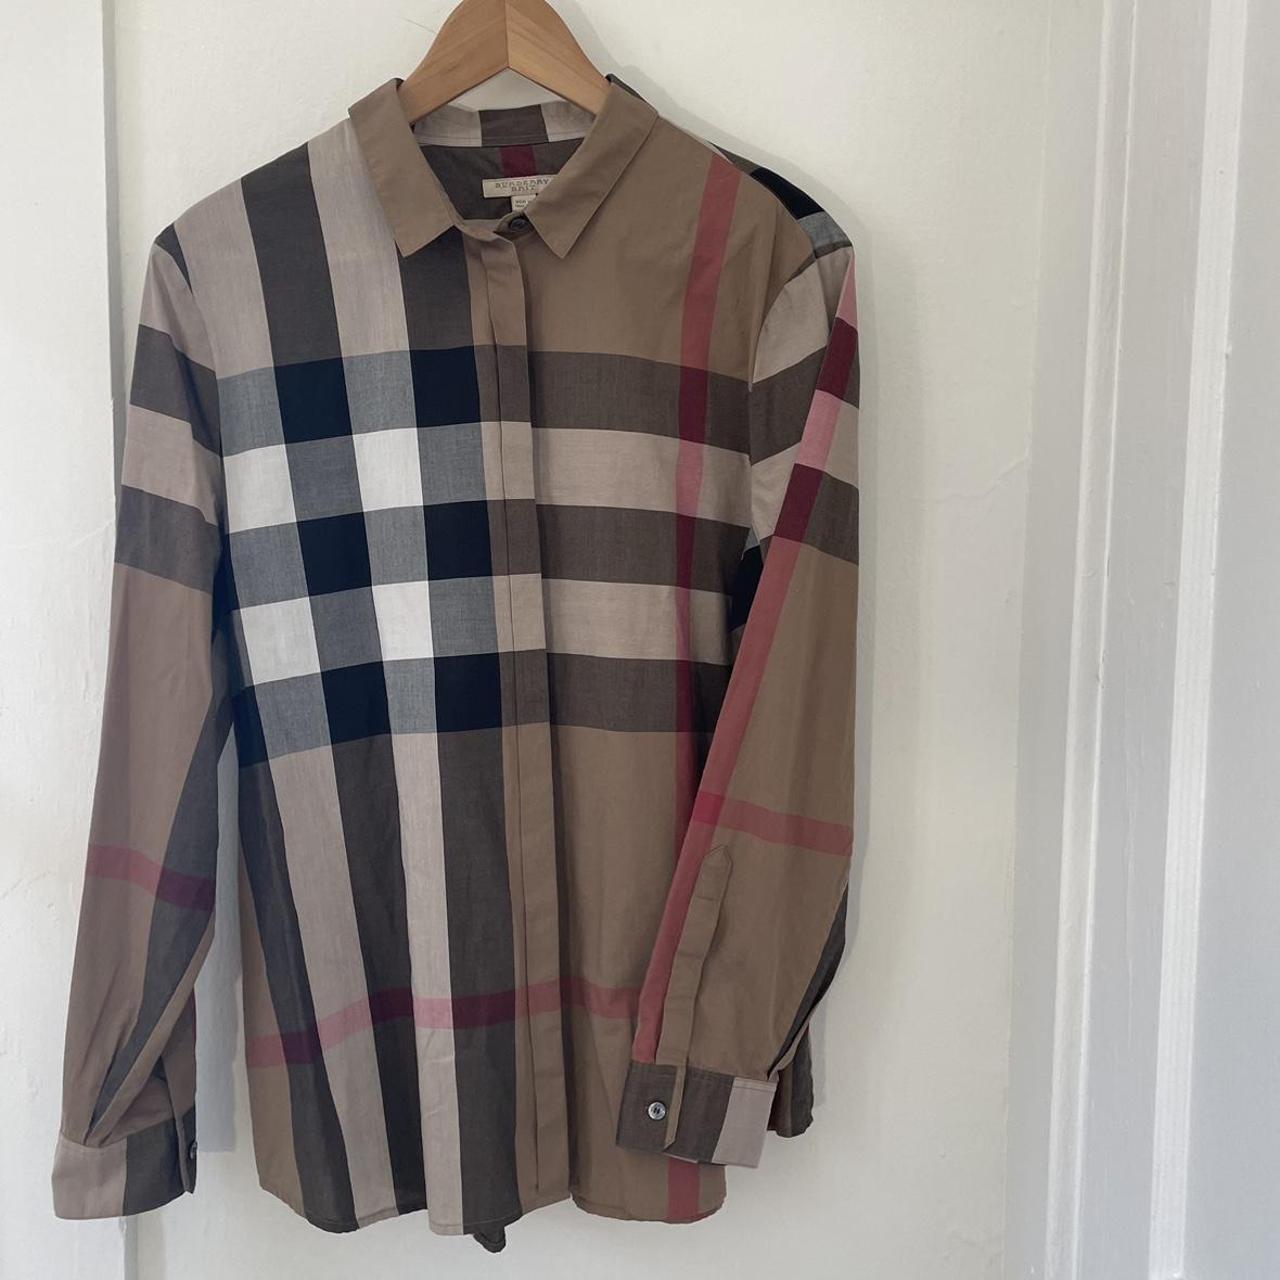 Burberry Brit Women's Tan and Red Shirt